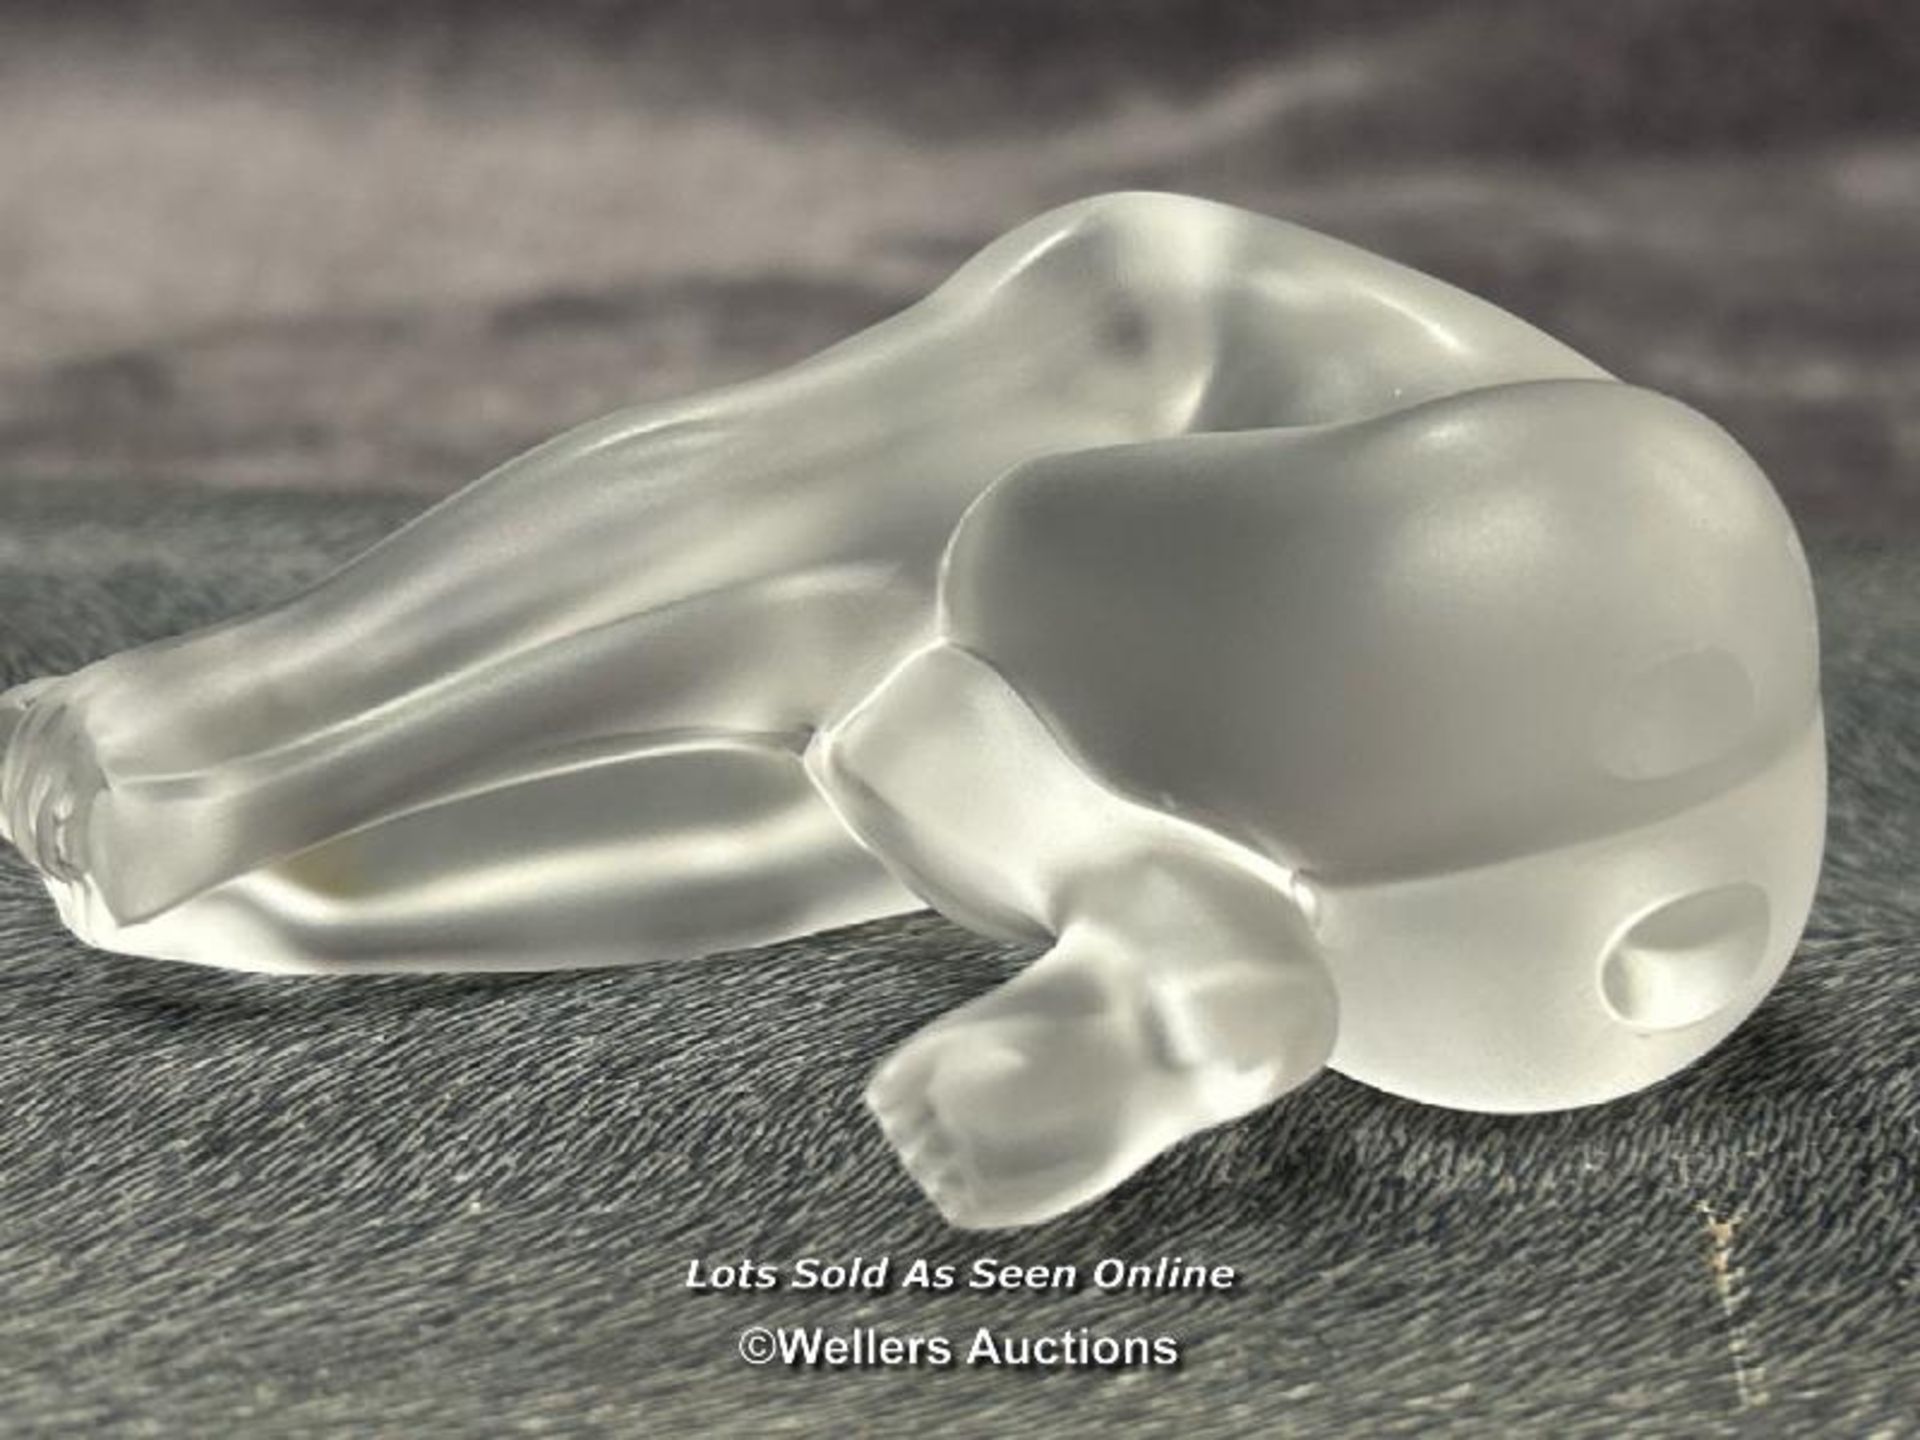 Lalique frosted crystal figurine 'Nude Temptation', 7cm high, signed / AN2 - Image 4 of 5